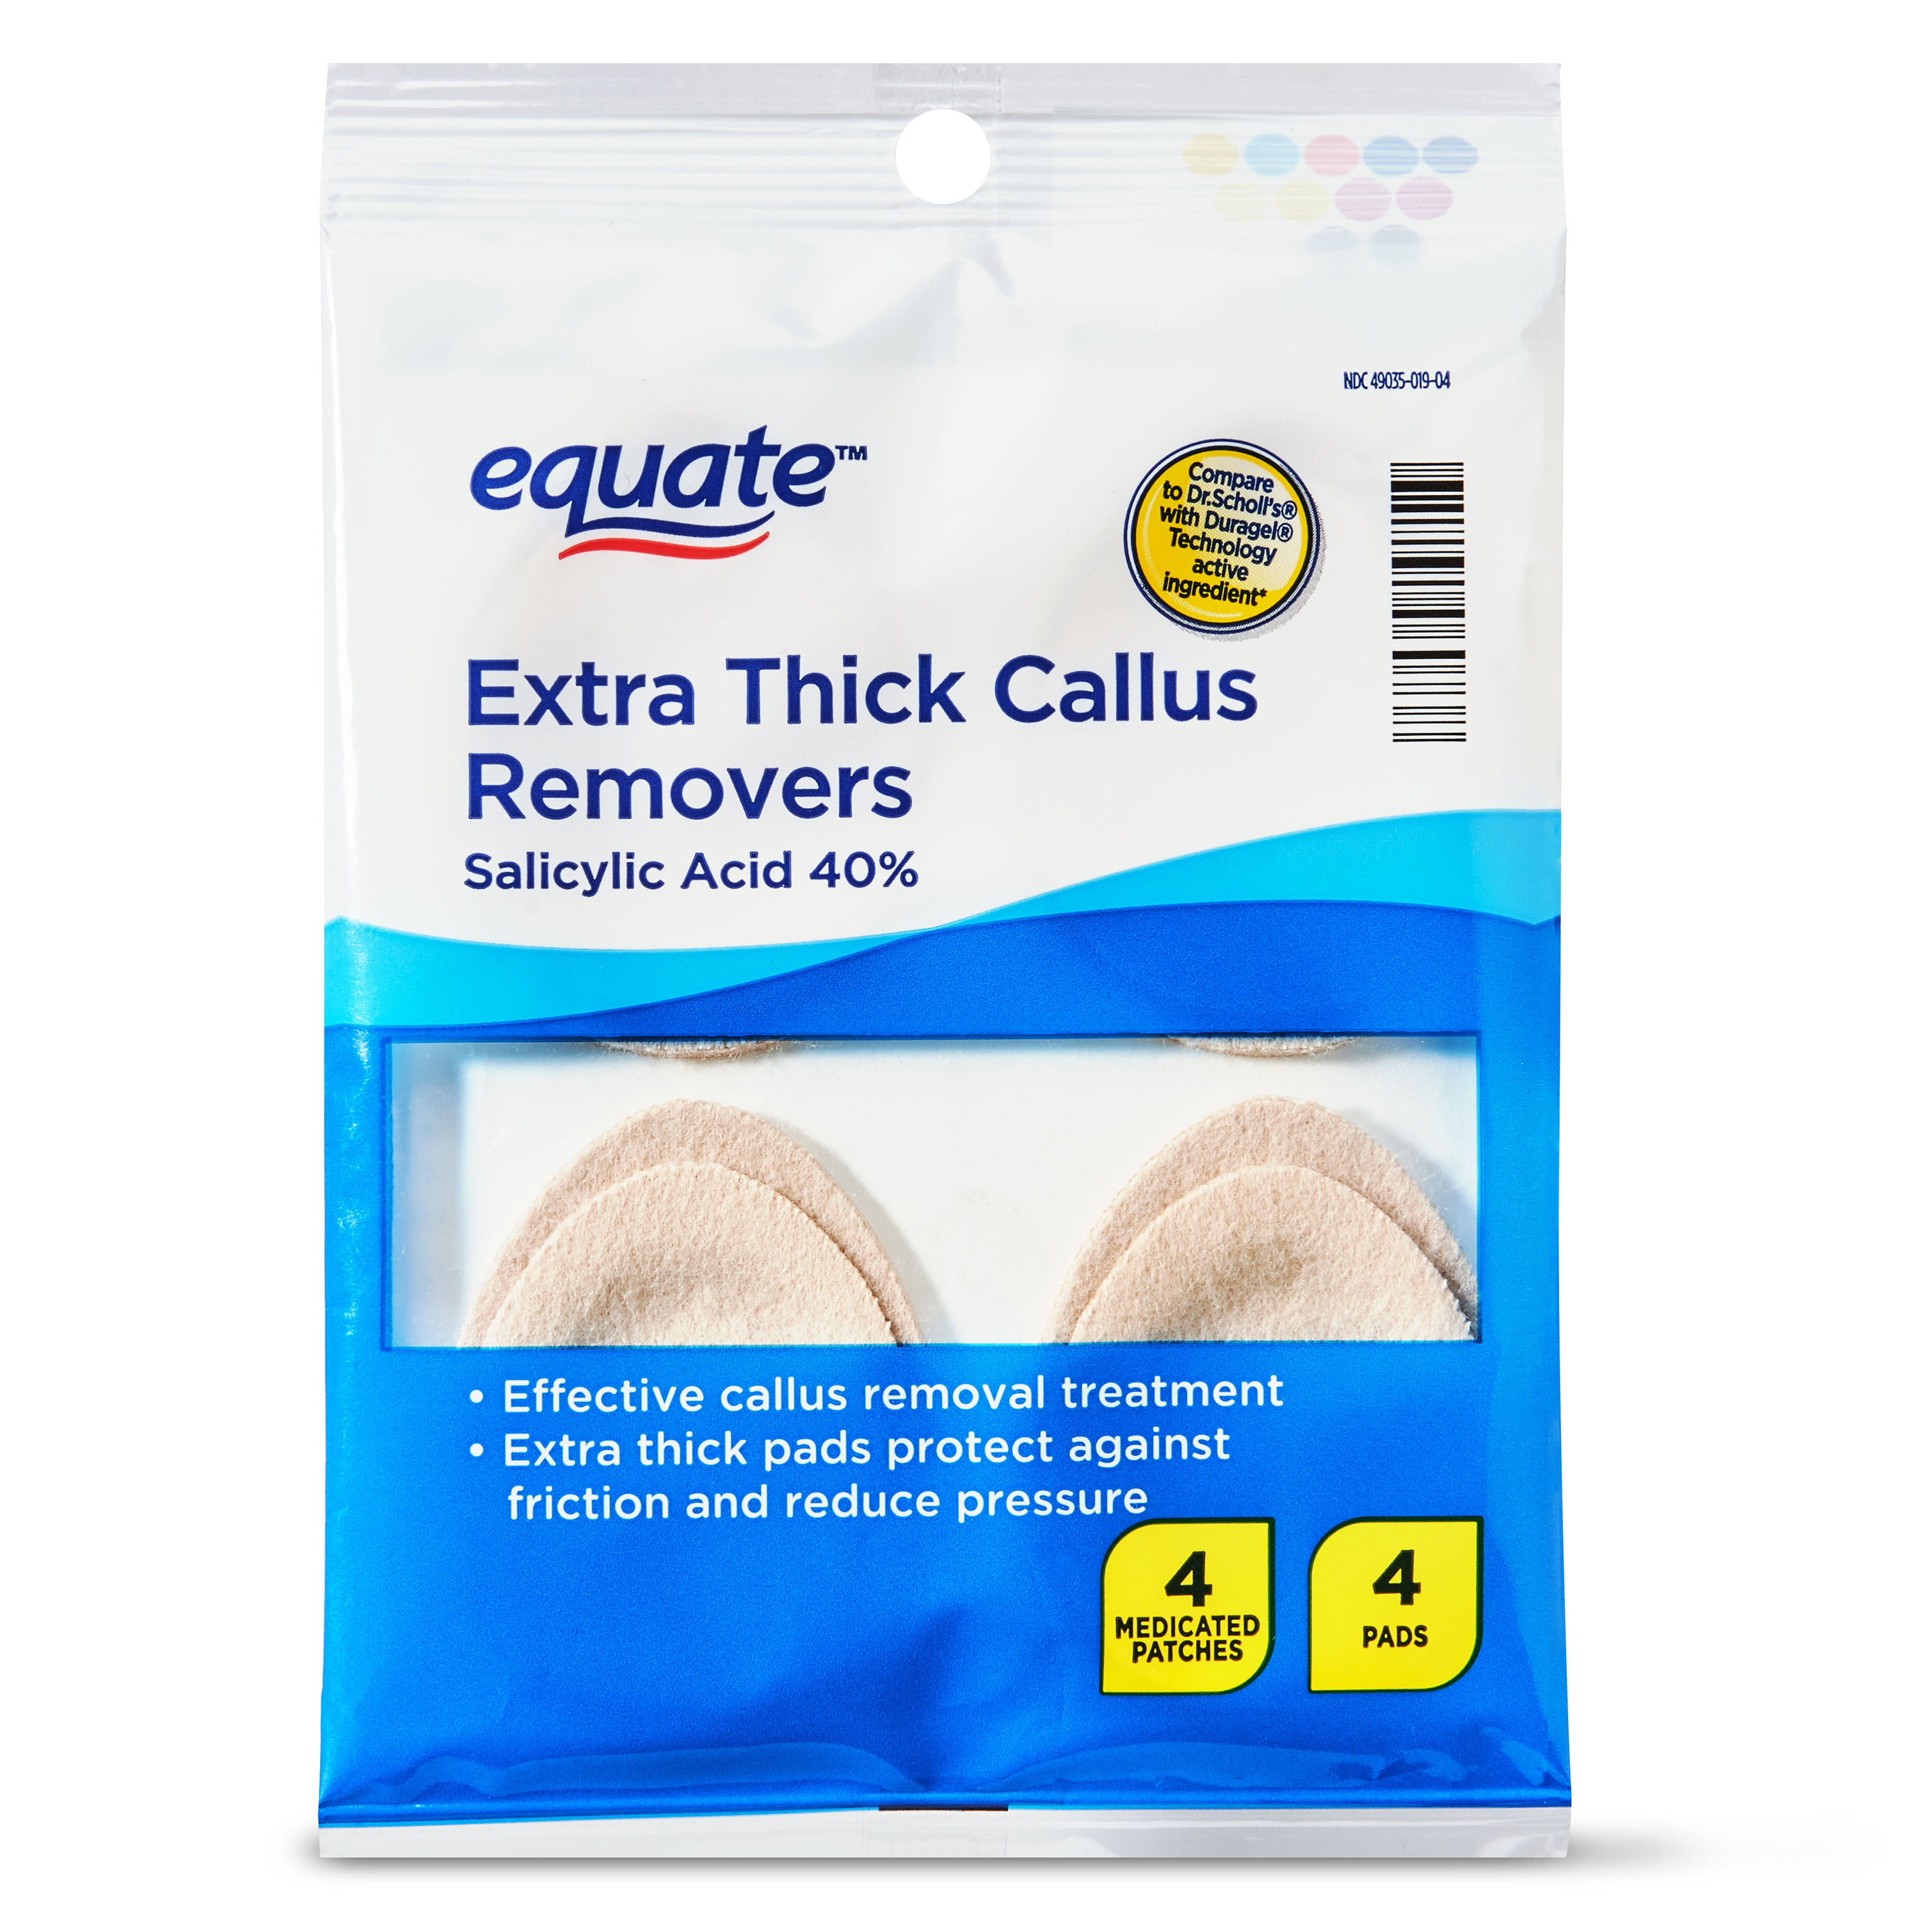 Equate Extra Thick Callus Removers, 8 